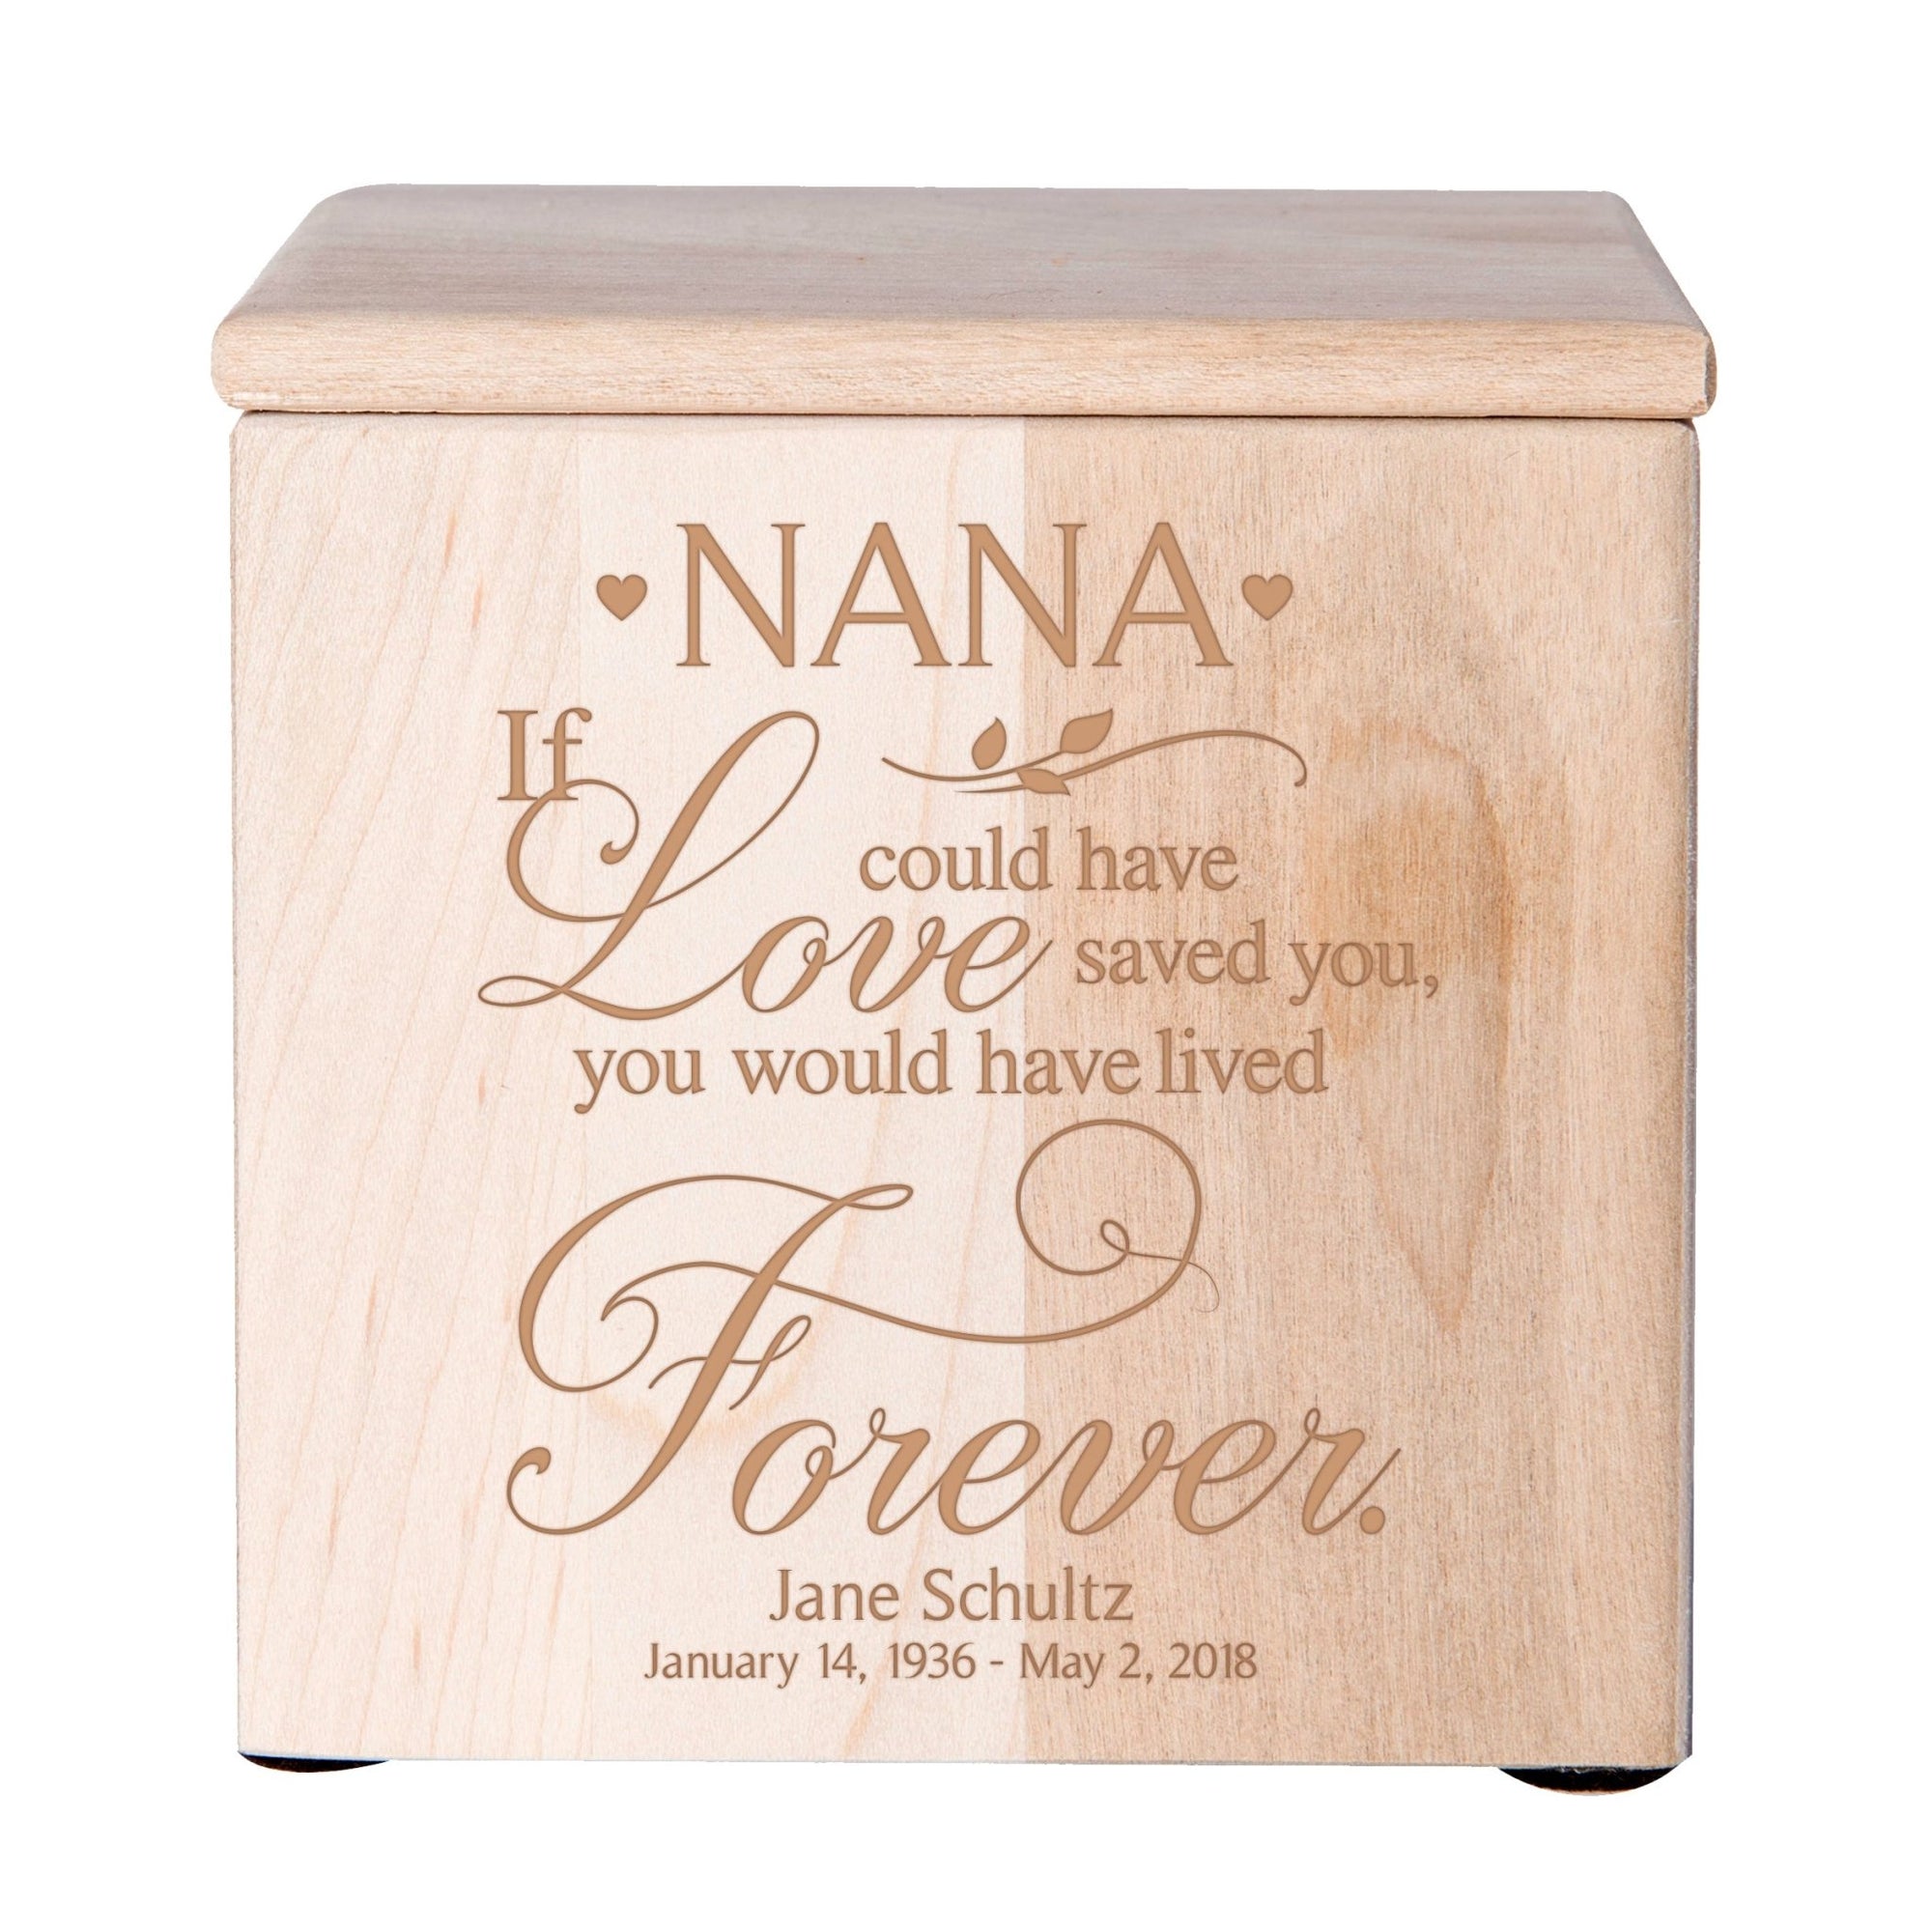 Custom Engraved Memorial Cremation Urn Box Holds 49 Cu Inches Of Human Ashes (If love could have saved Nana) Funeral and Condolence Keepsake - LifeSong Milestones